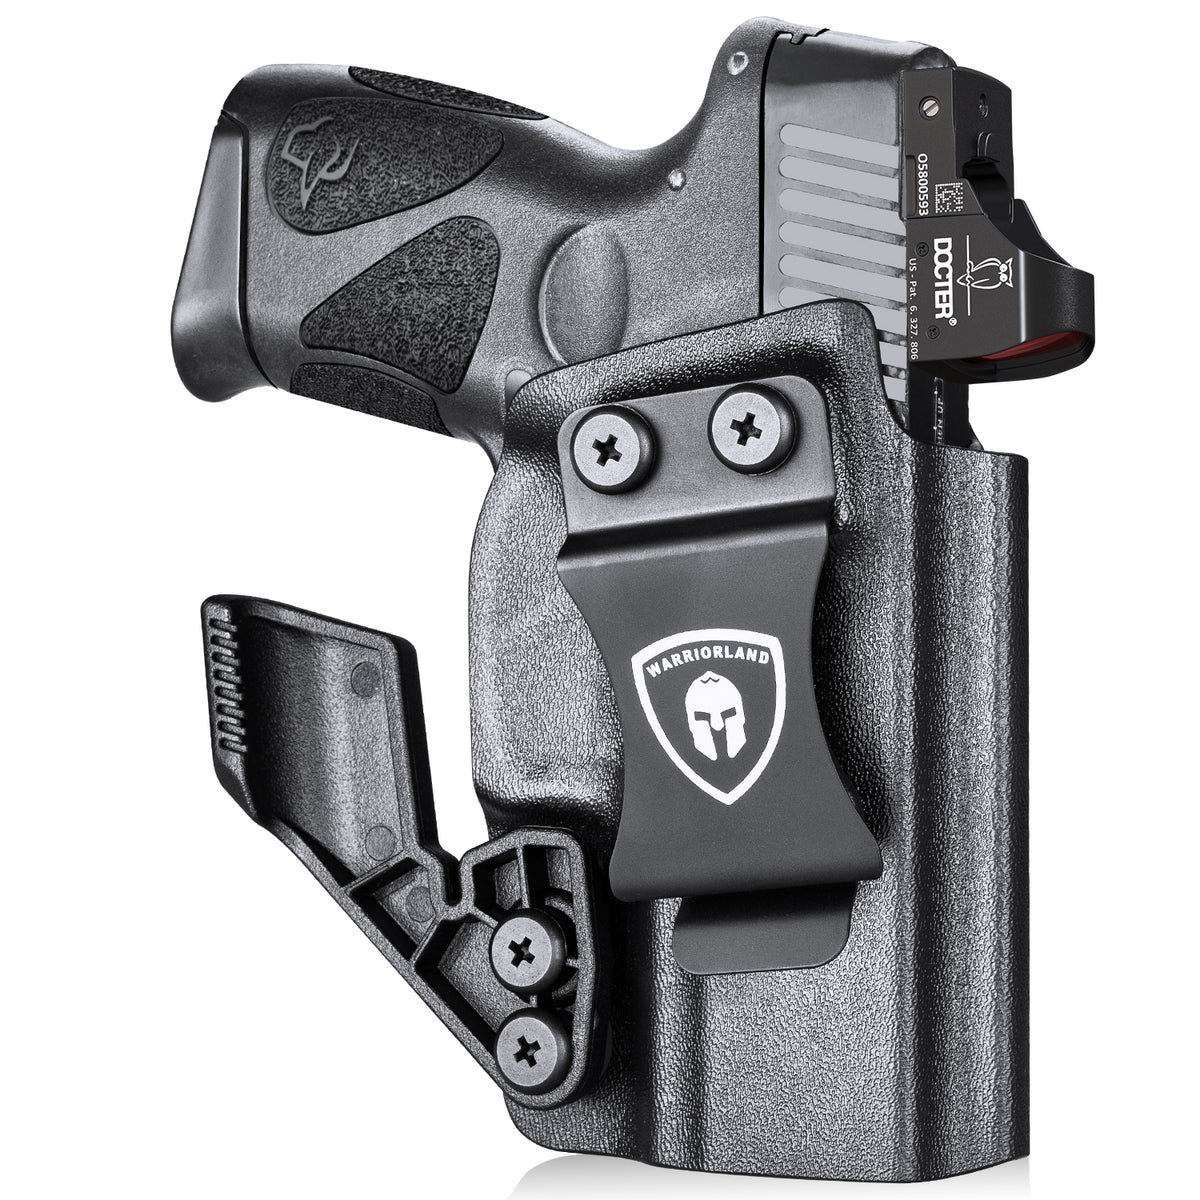 1.75 Inch Metal Clip IWB Kydex Holsters with Optics Ready & Claw for Taurus G2C/G3C  | Right Hand